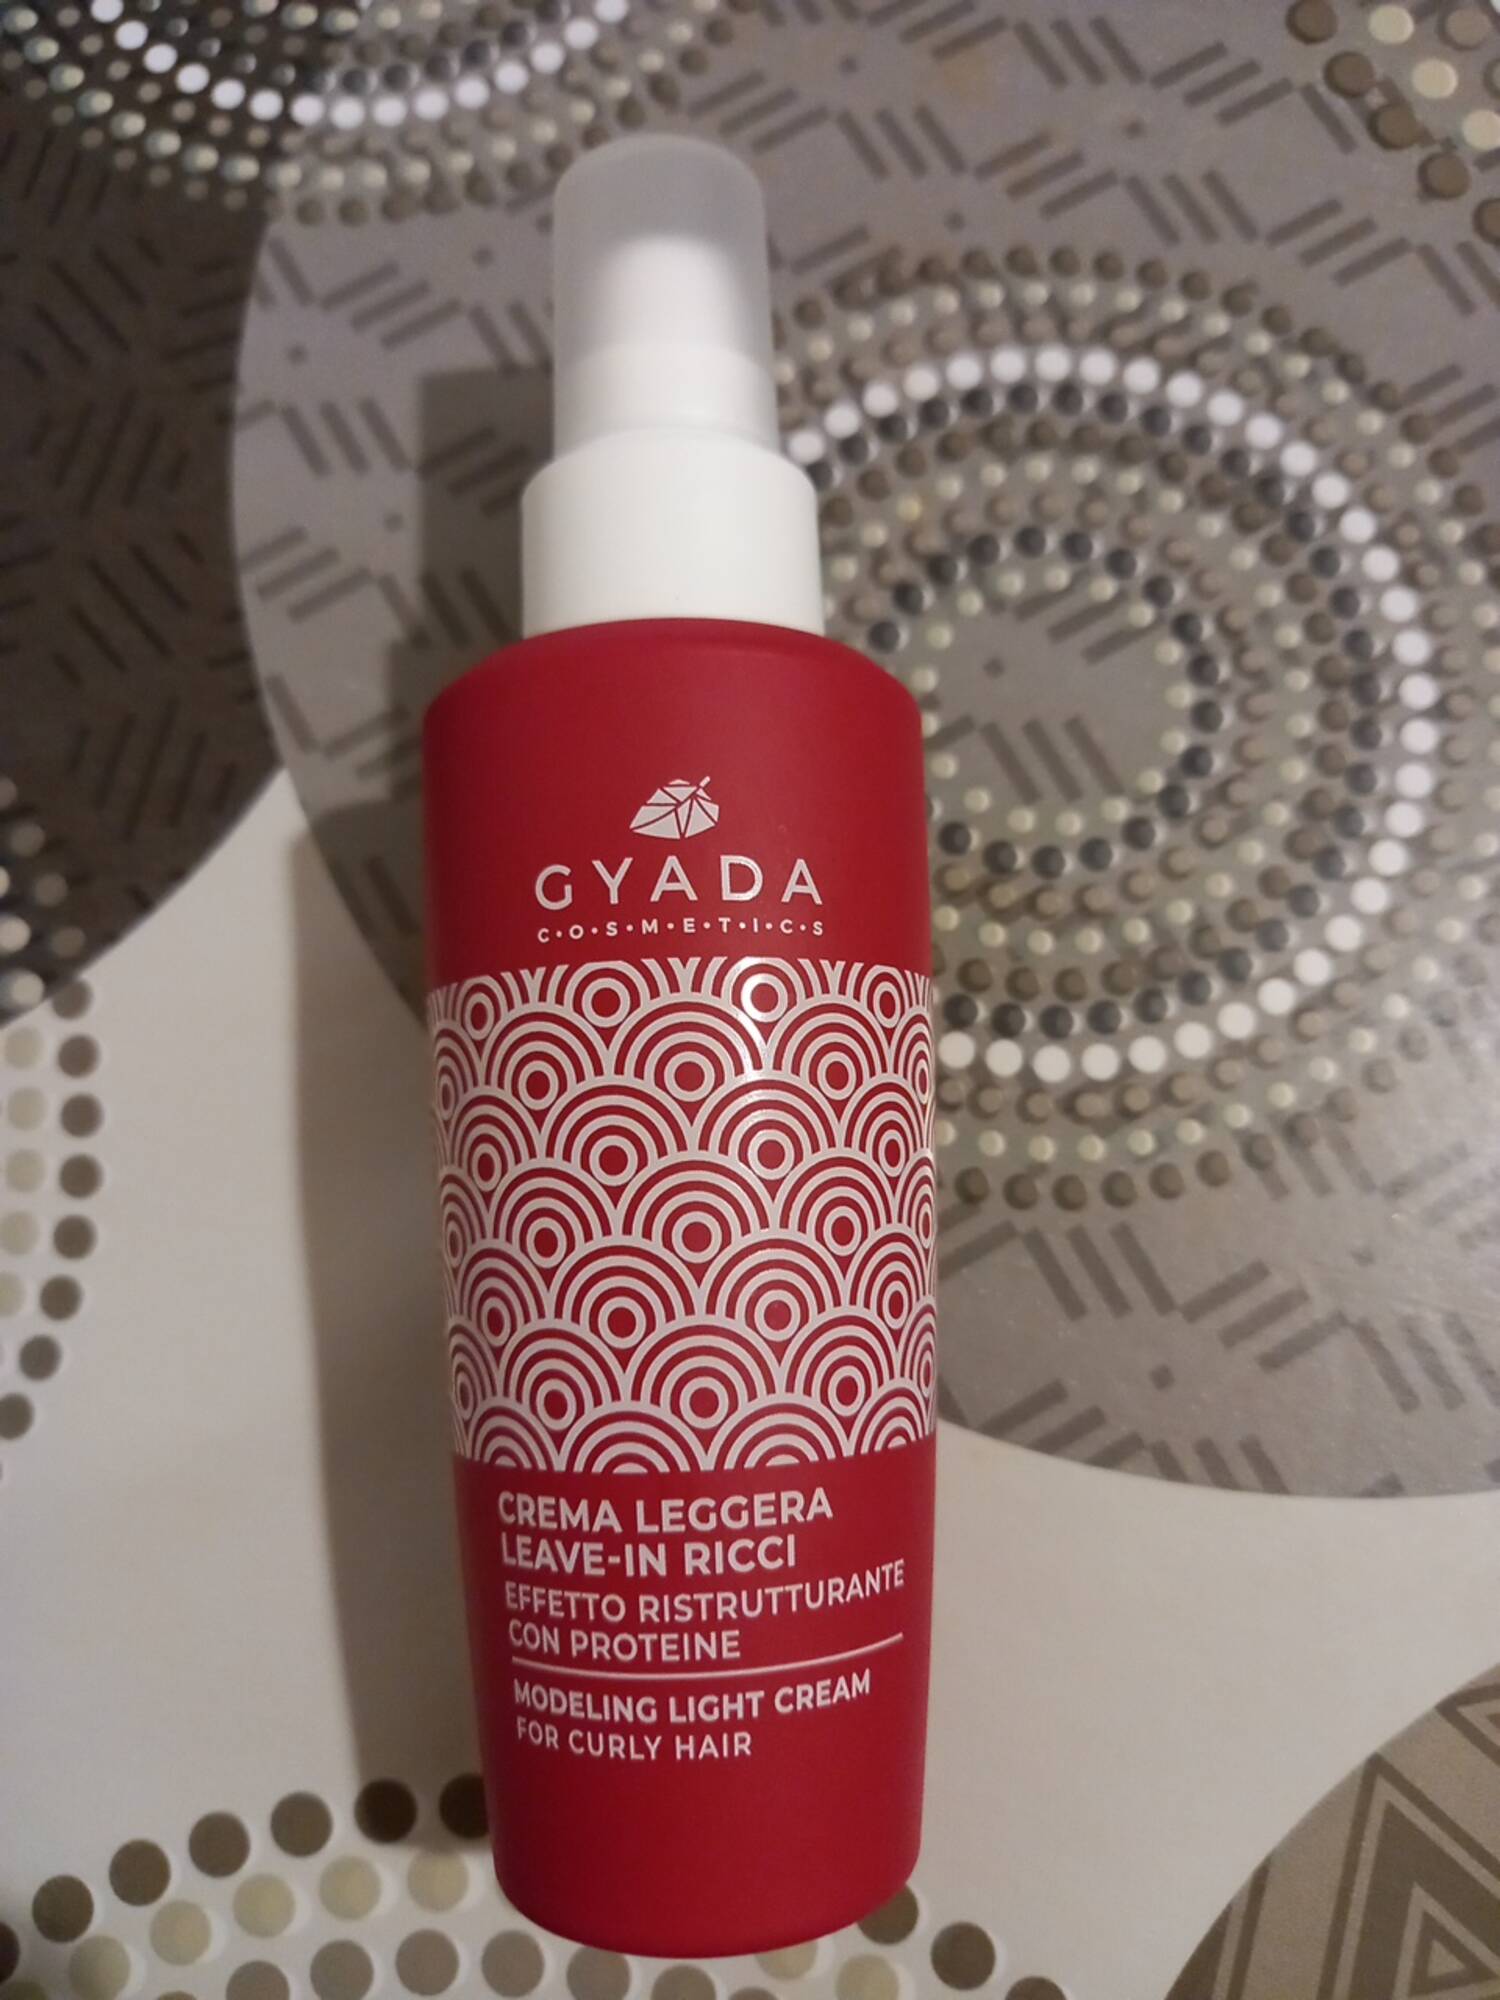 GYADA - Modeling light cream for curly hair